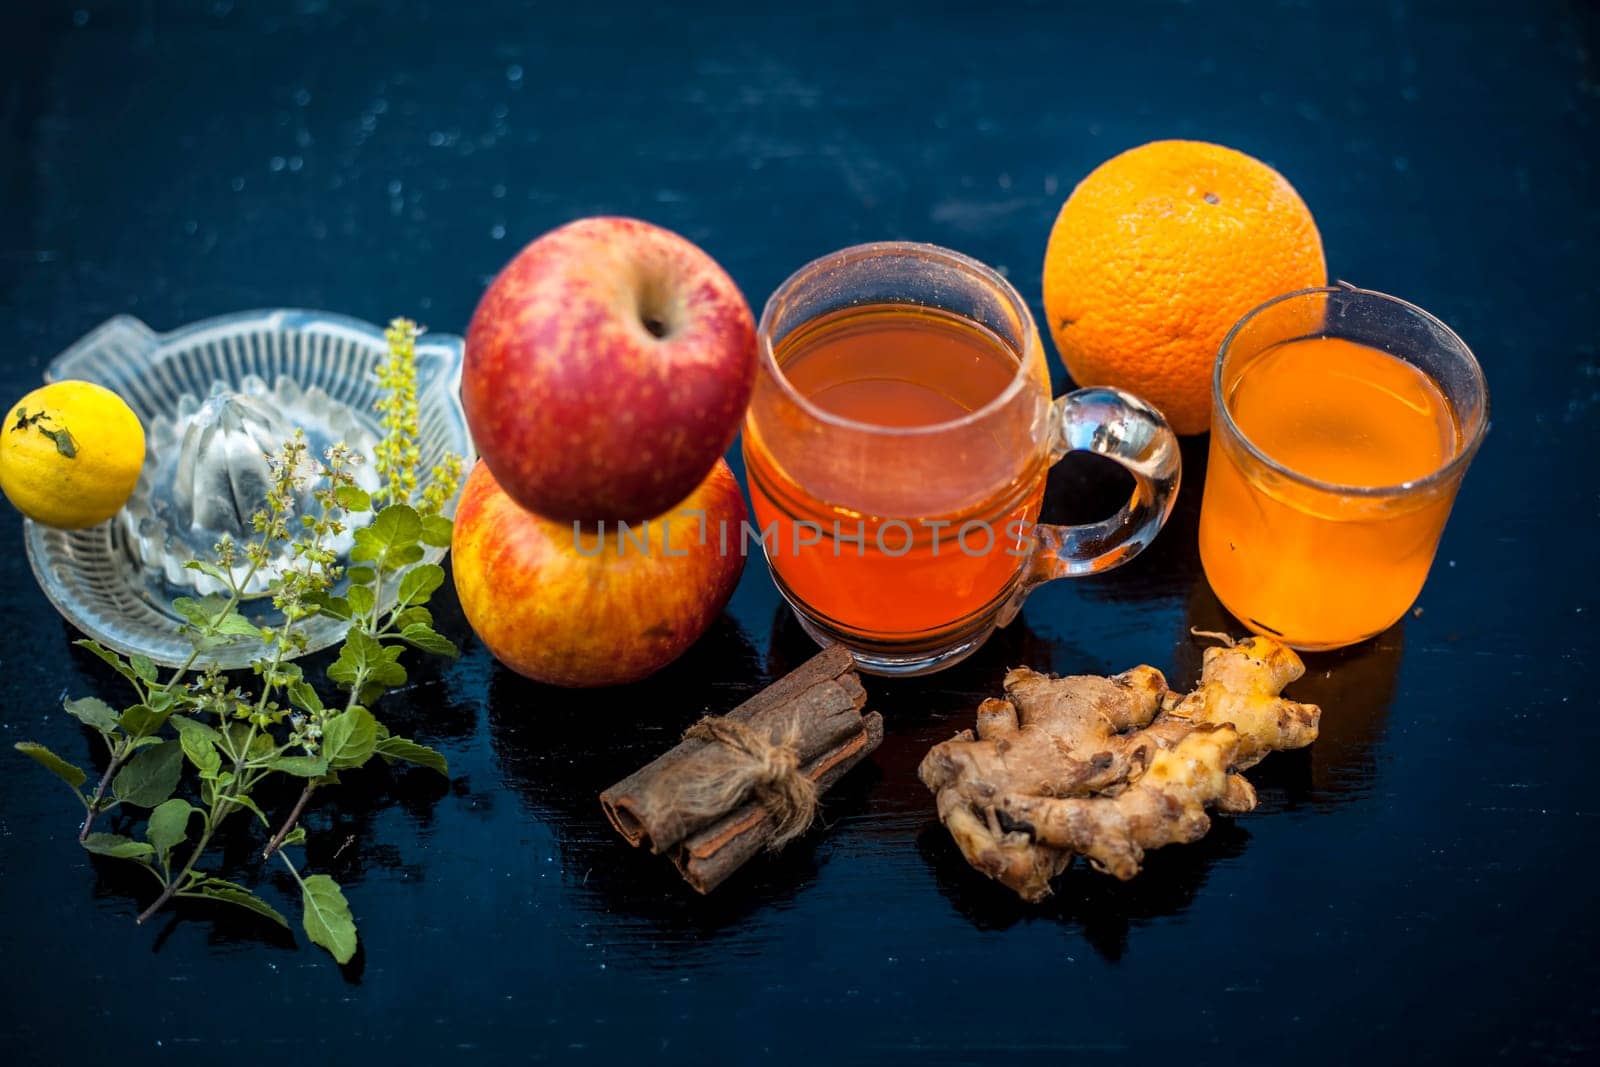 Close-up of herbal and organic juice of apple with orange juice, cinnamon sticks, lemon juice, ginger or adrak, and some tulsi leaves or holy basil leaves in a transparent glass with all raw ingredients. by mirzamlk